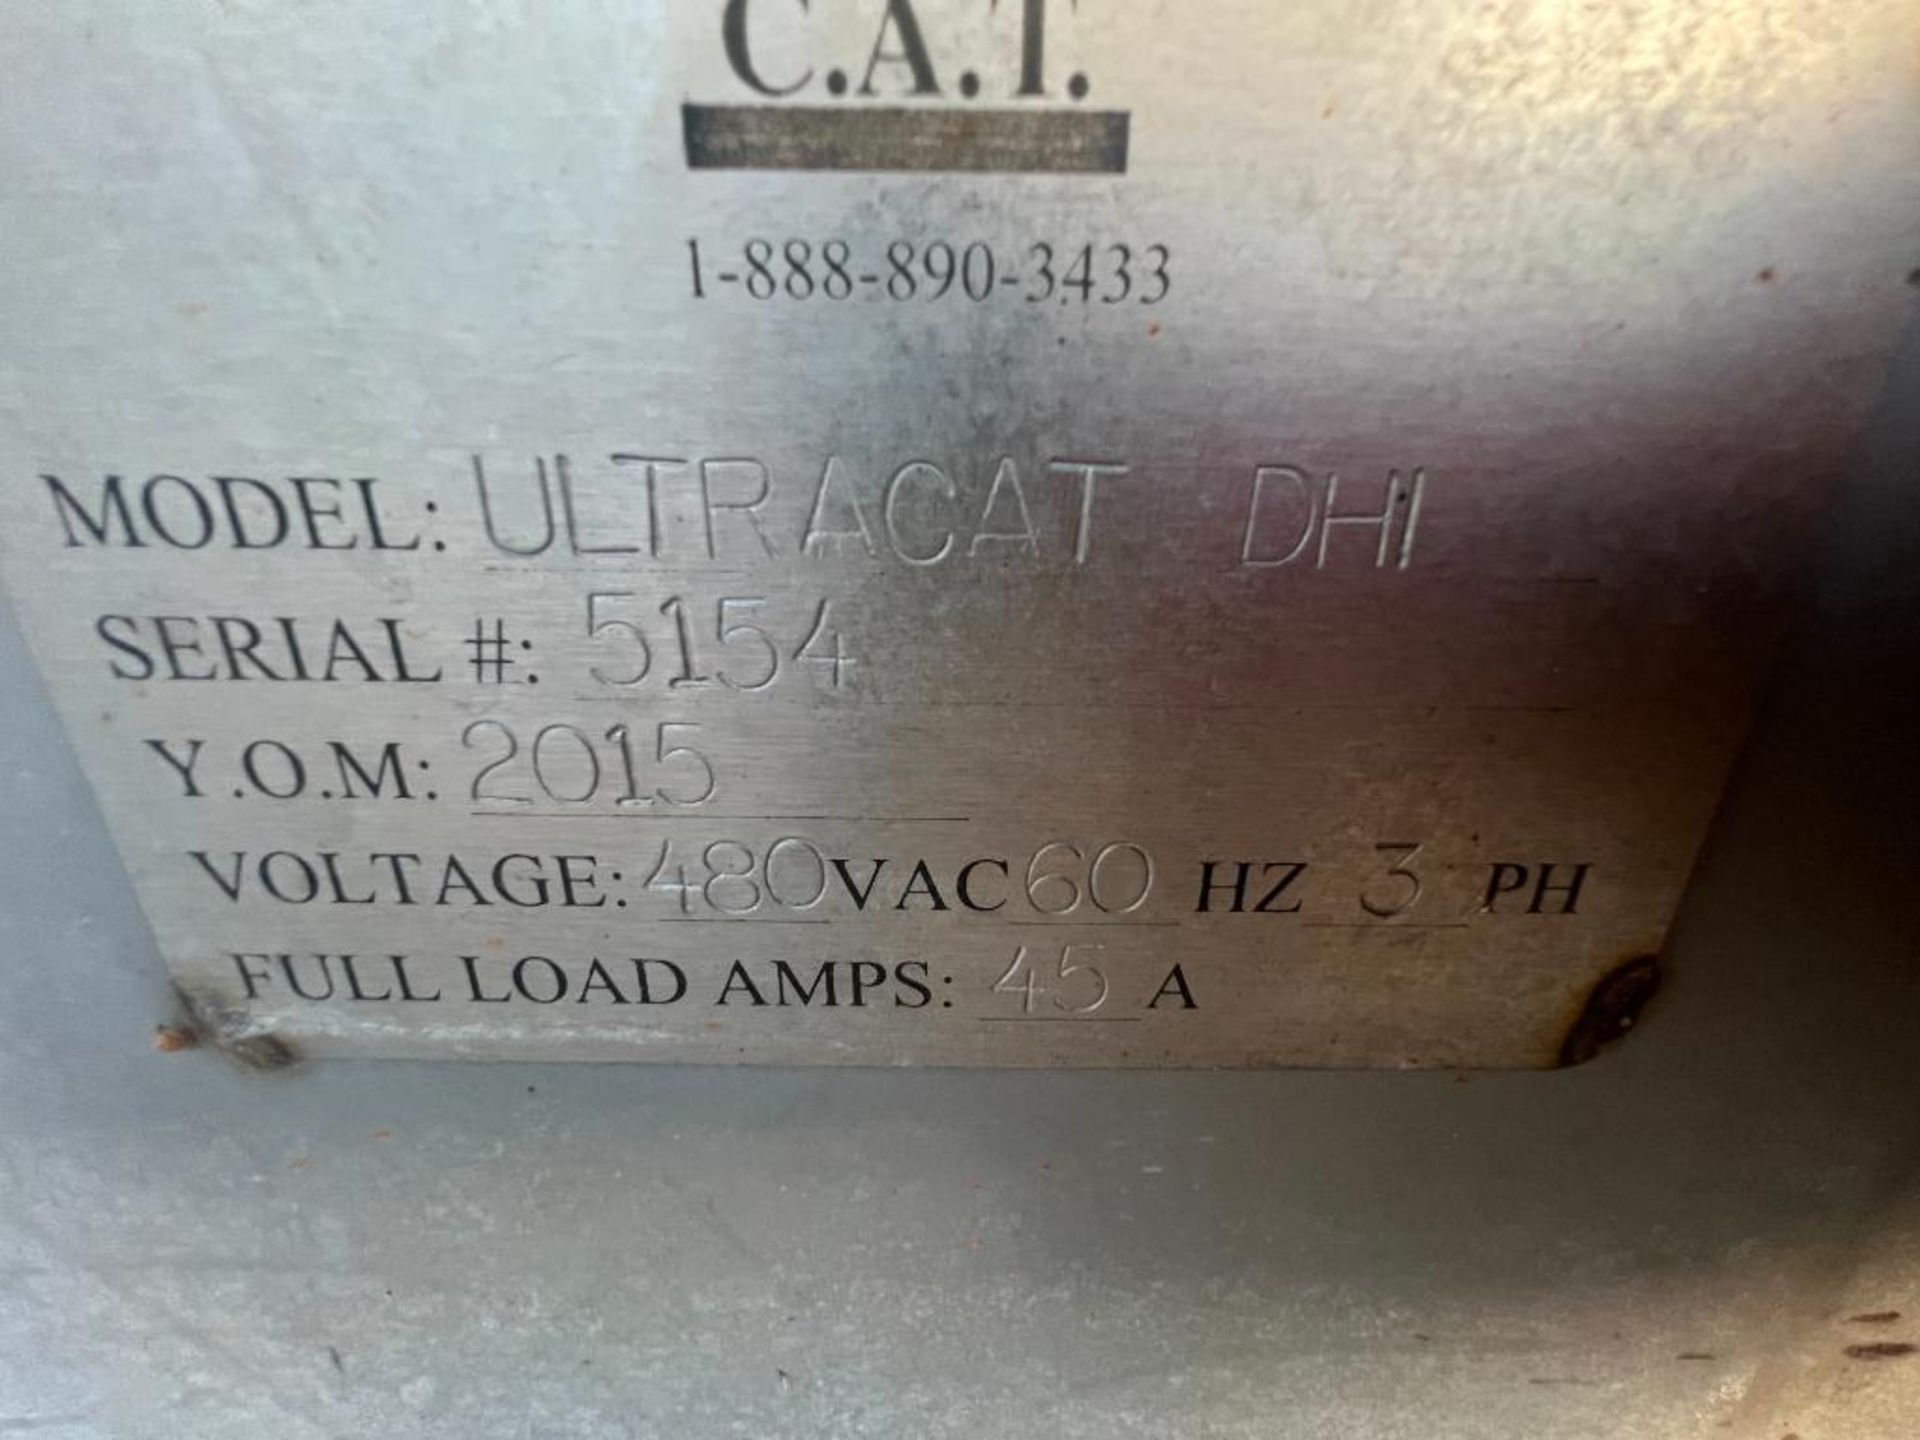 2015 C.A.T. drum injector, model: Ultracat_DHI, sn: 5154 - Image 2 of 31